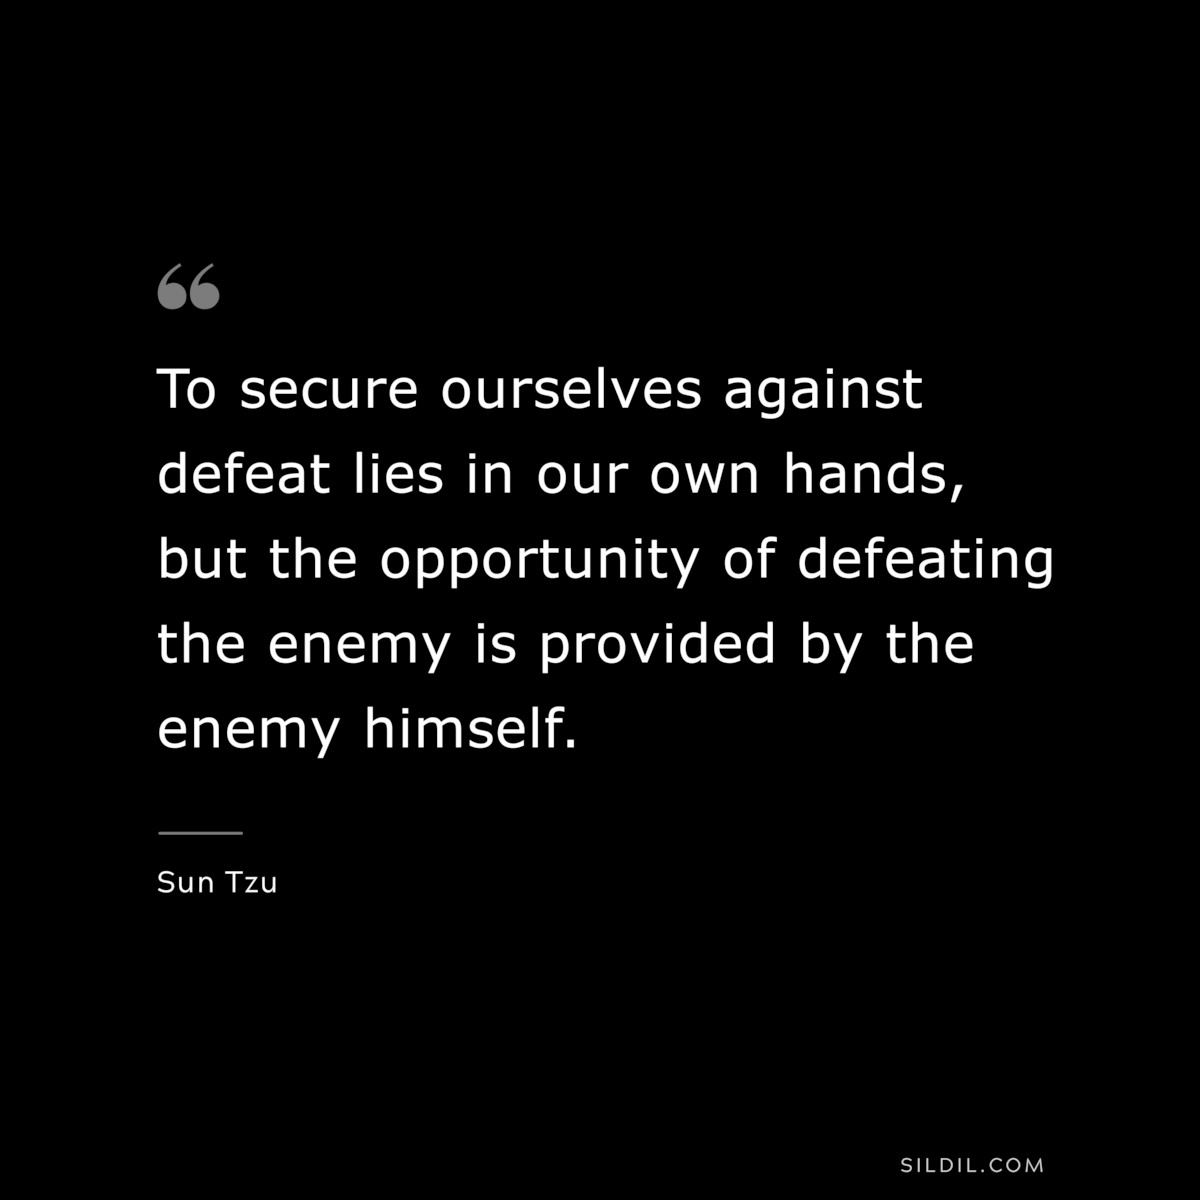 To secure ourselves against defeat lies in our own hands, but the opportunity of defeating the enemy is provided by the enemy himself.― Sun Tzu